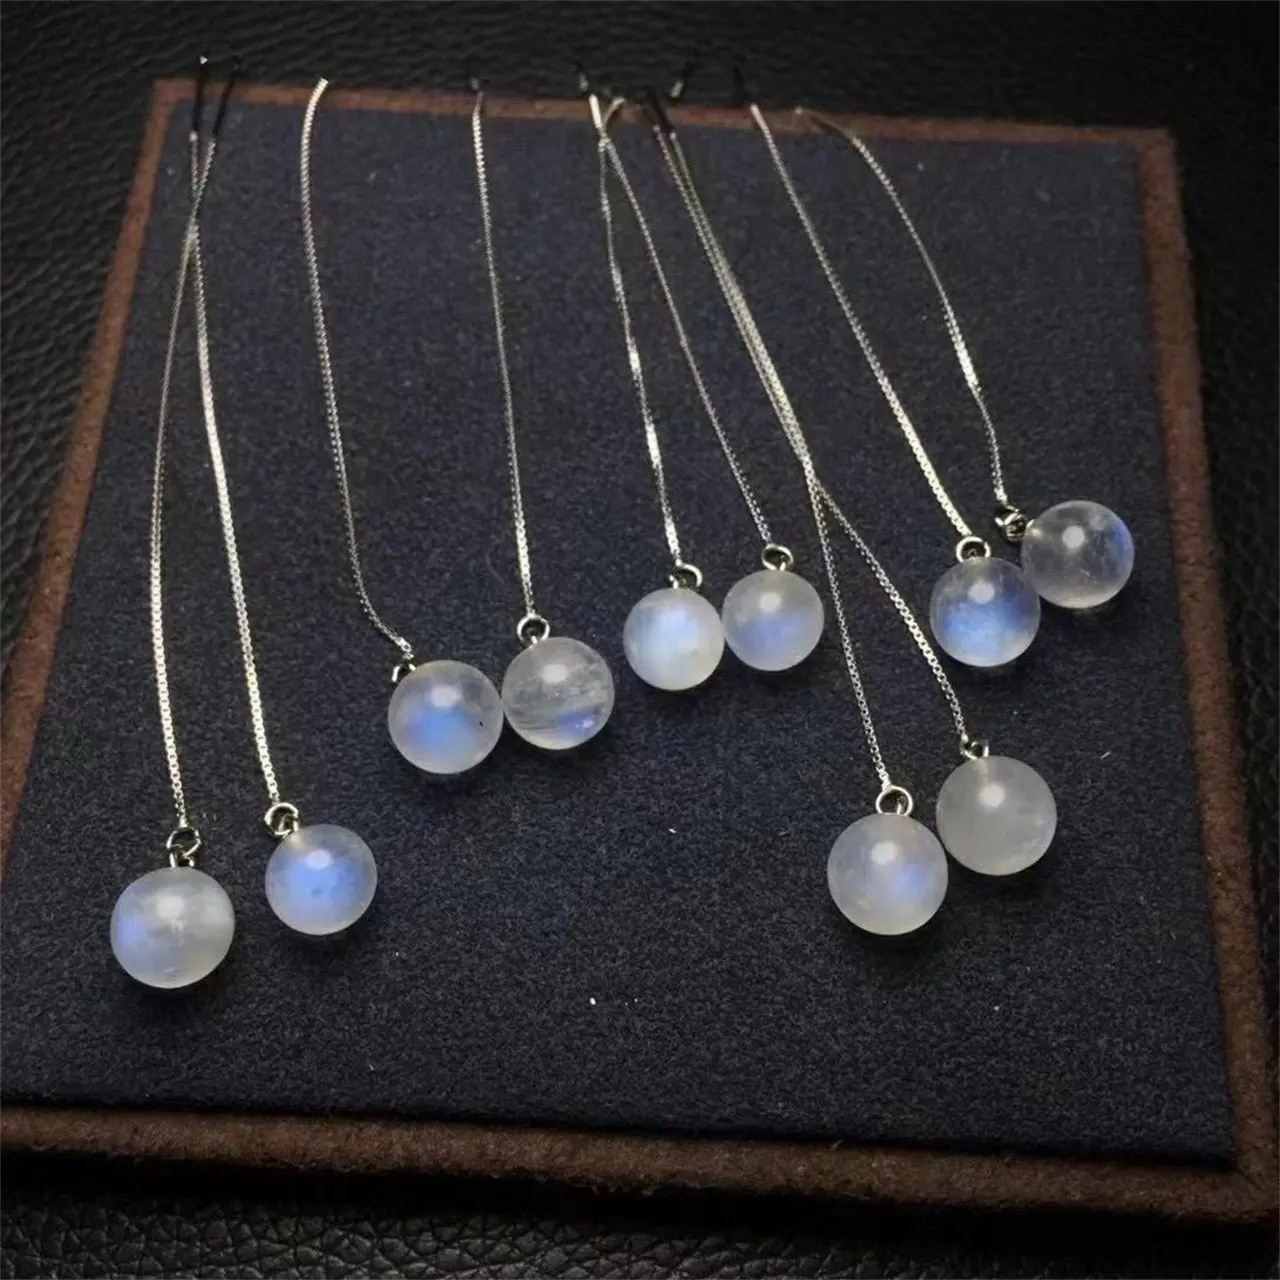 Natural Blue Moonstone Earwire Models S925 Silver Inlaid Healing Stones Jewelry Crystal Earrings